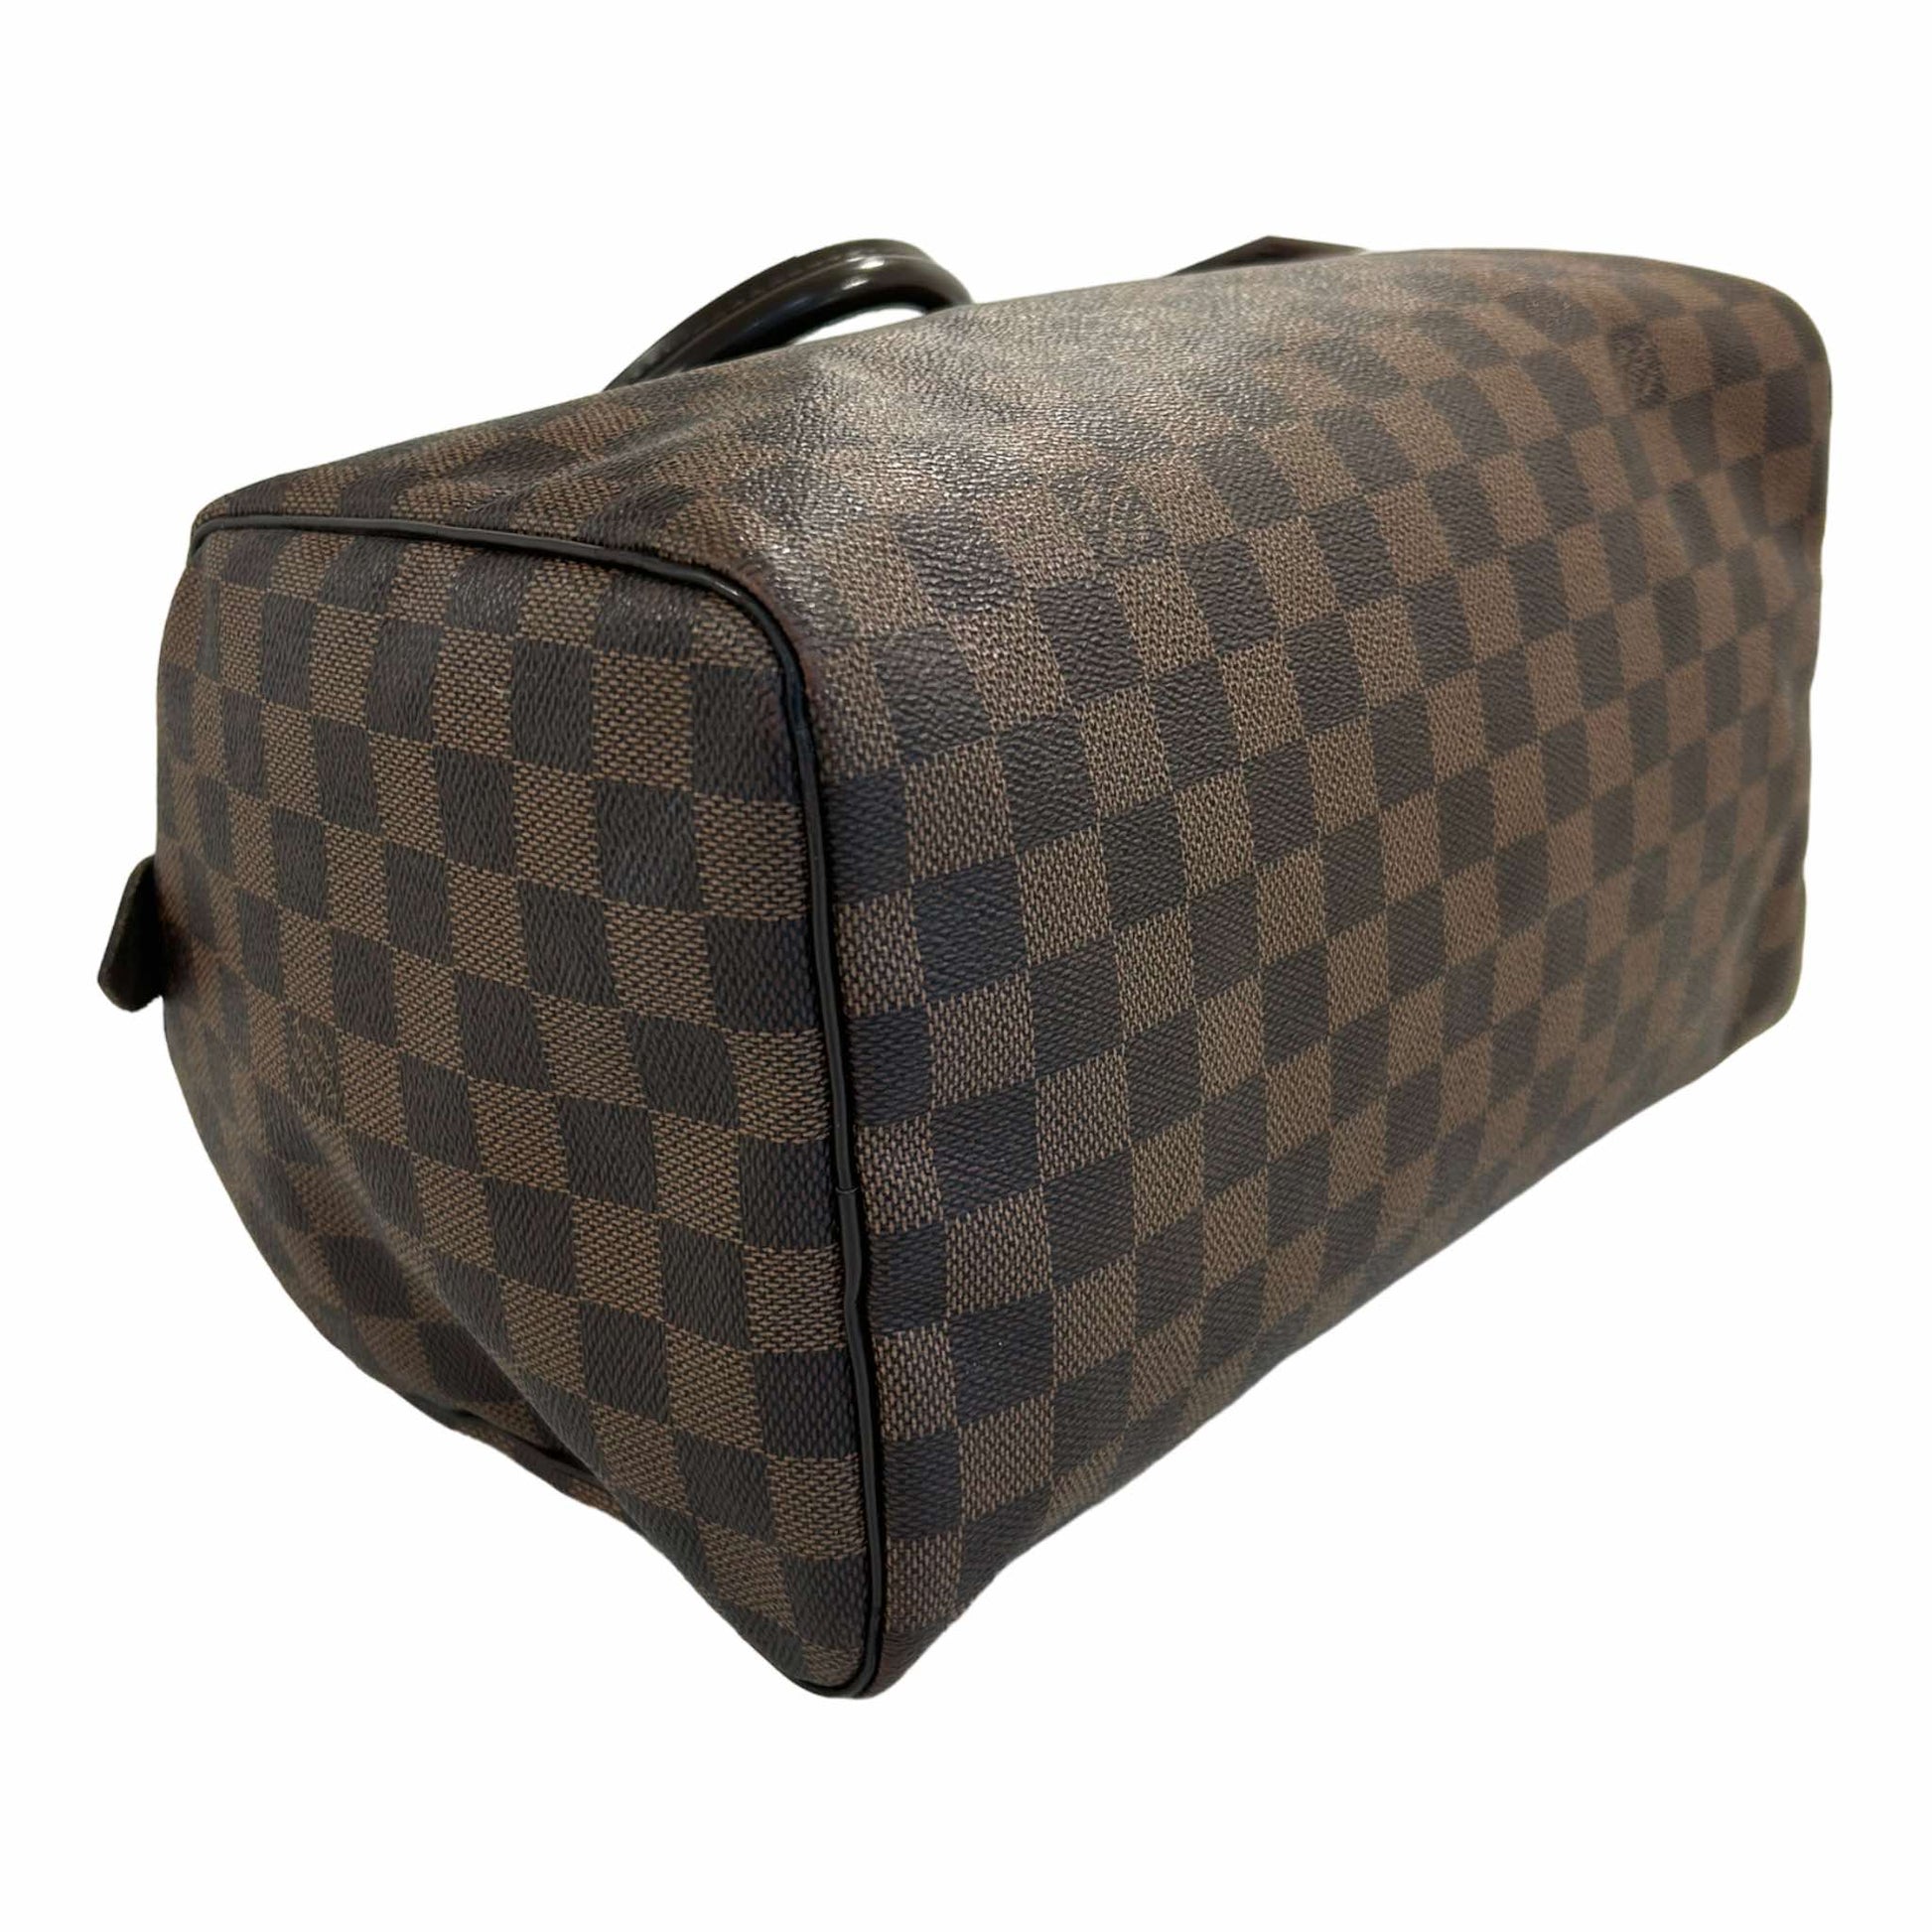 Authentic LOUIS VUITTON Damier Ebene Speedy 30 N41364 with red lining